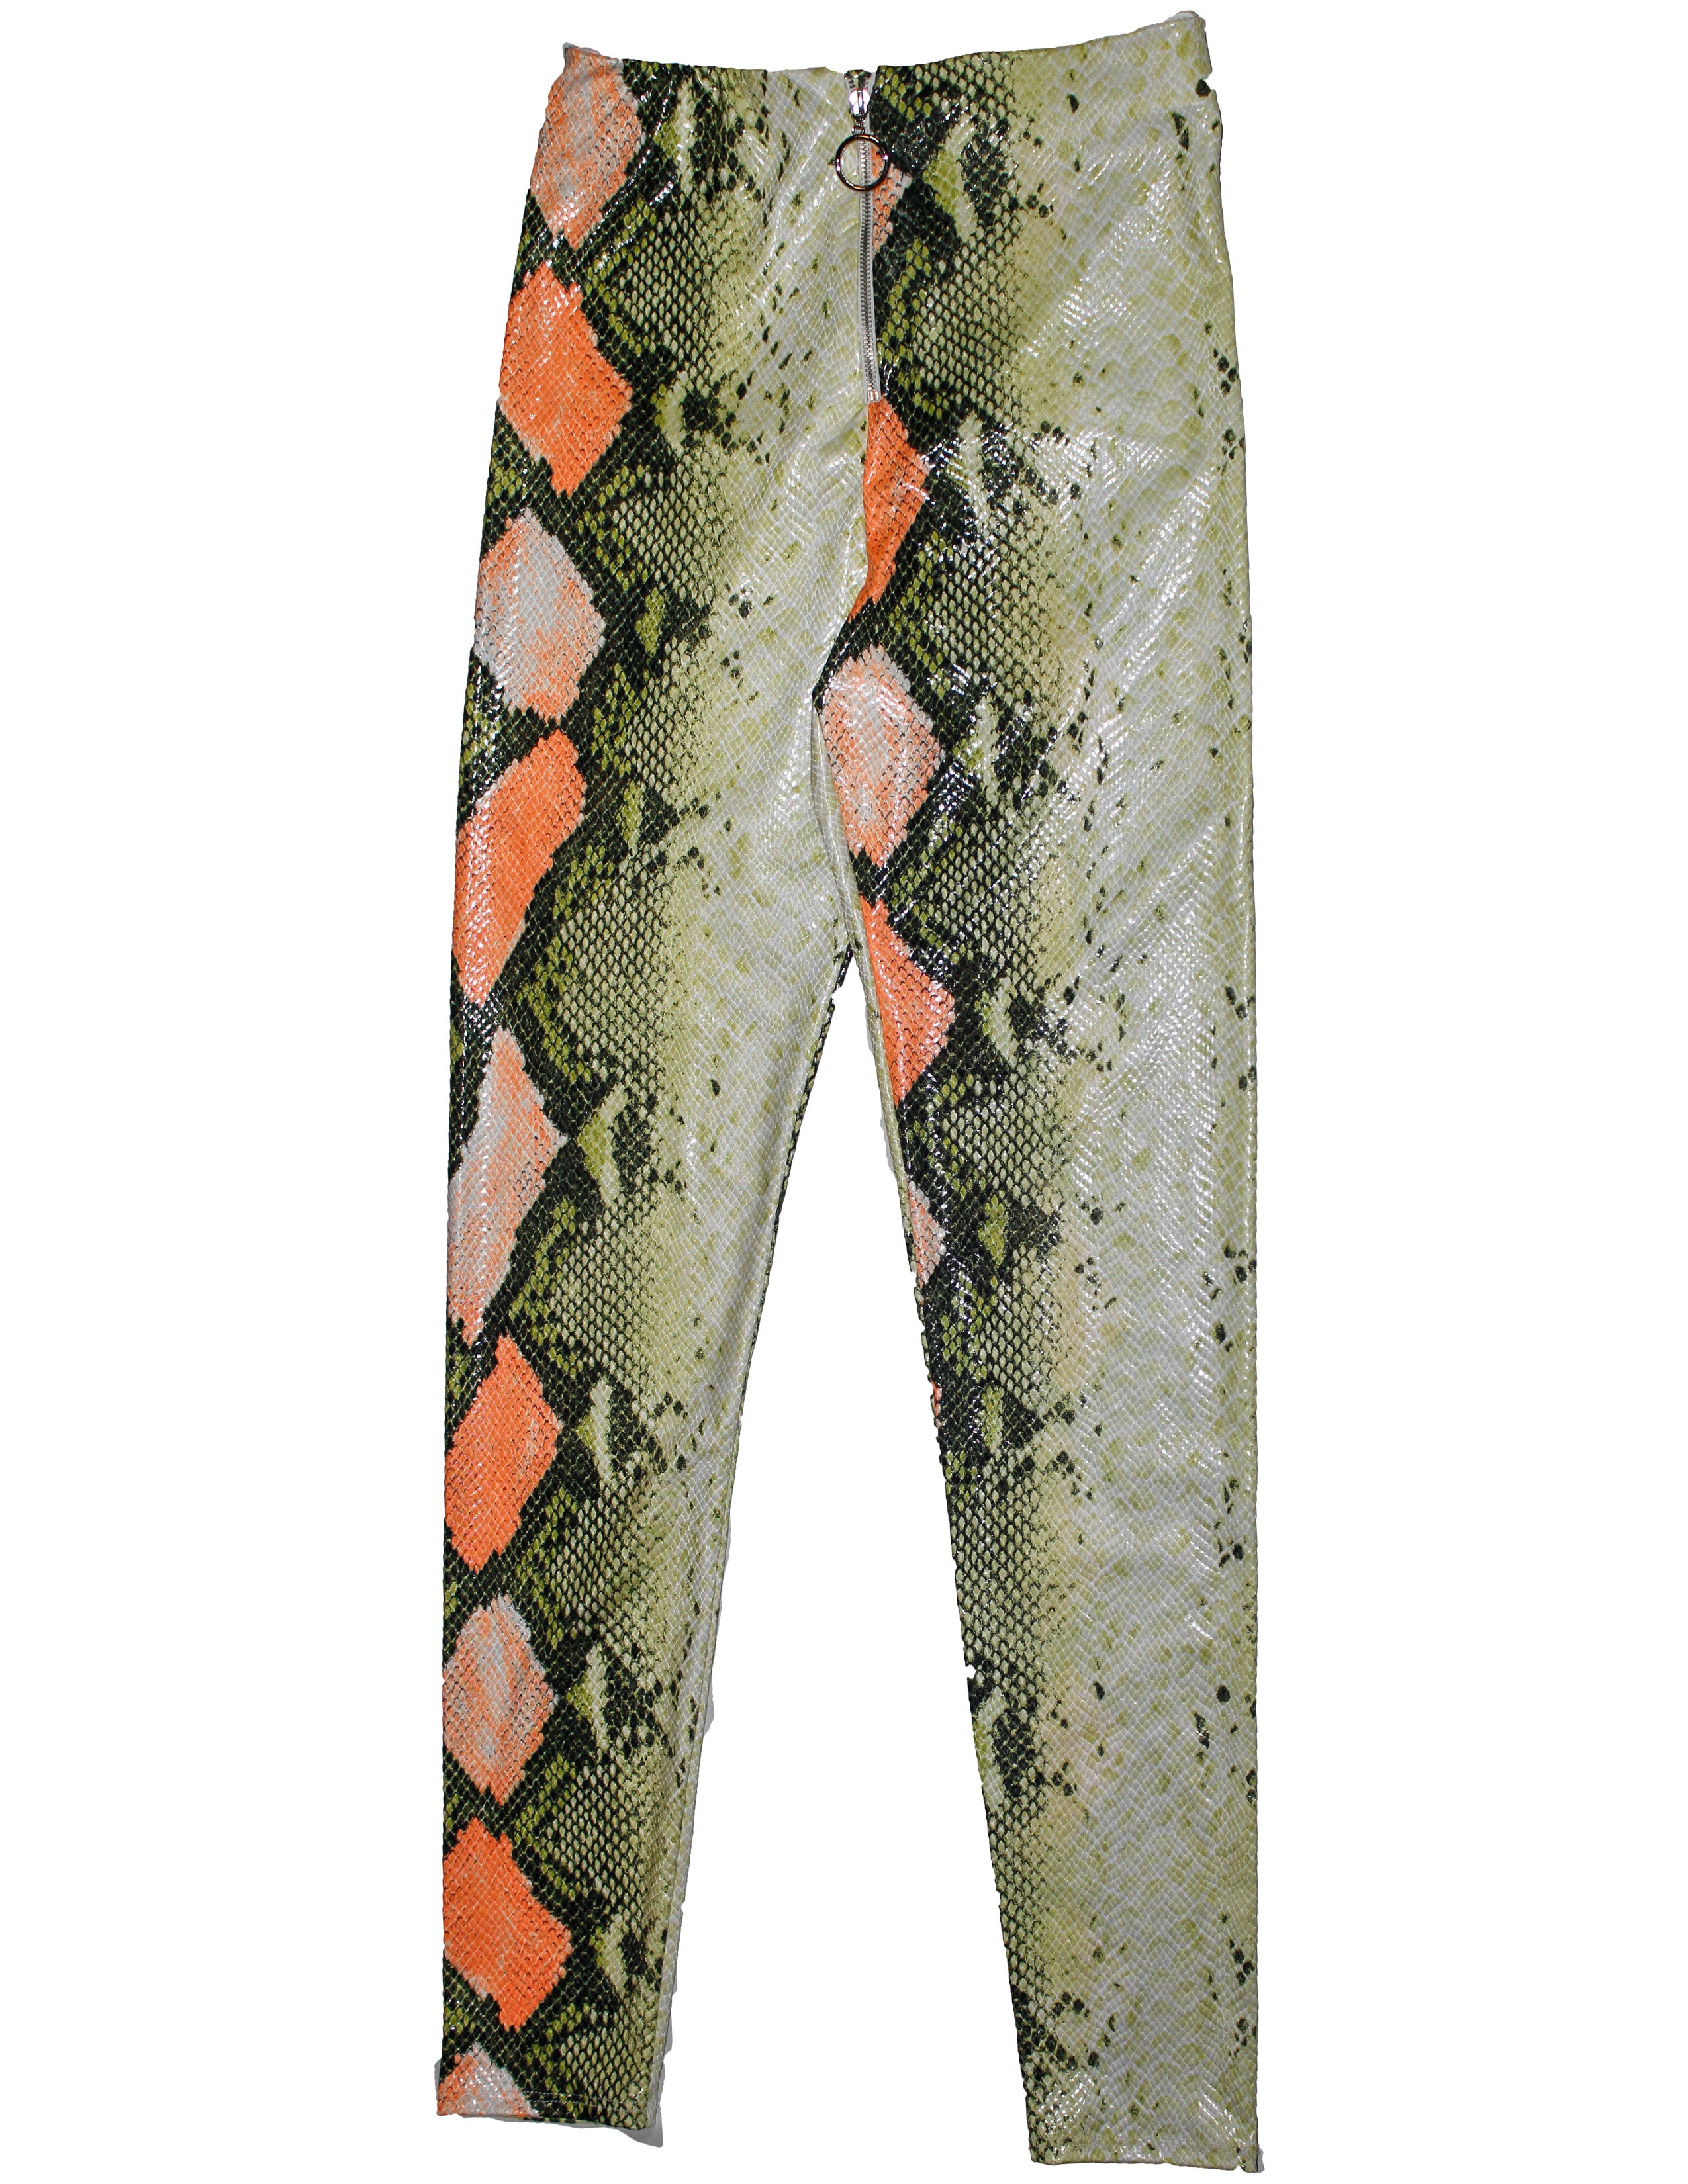 Constrictor Orange and Lime Pants